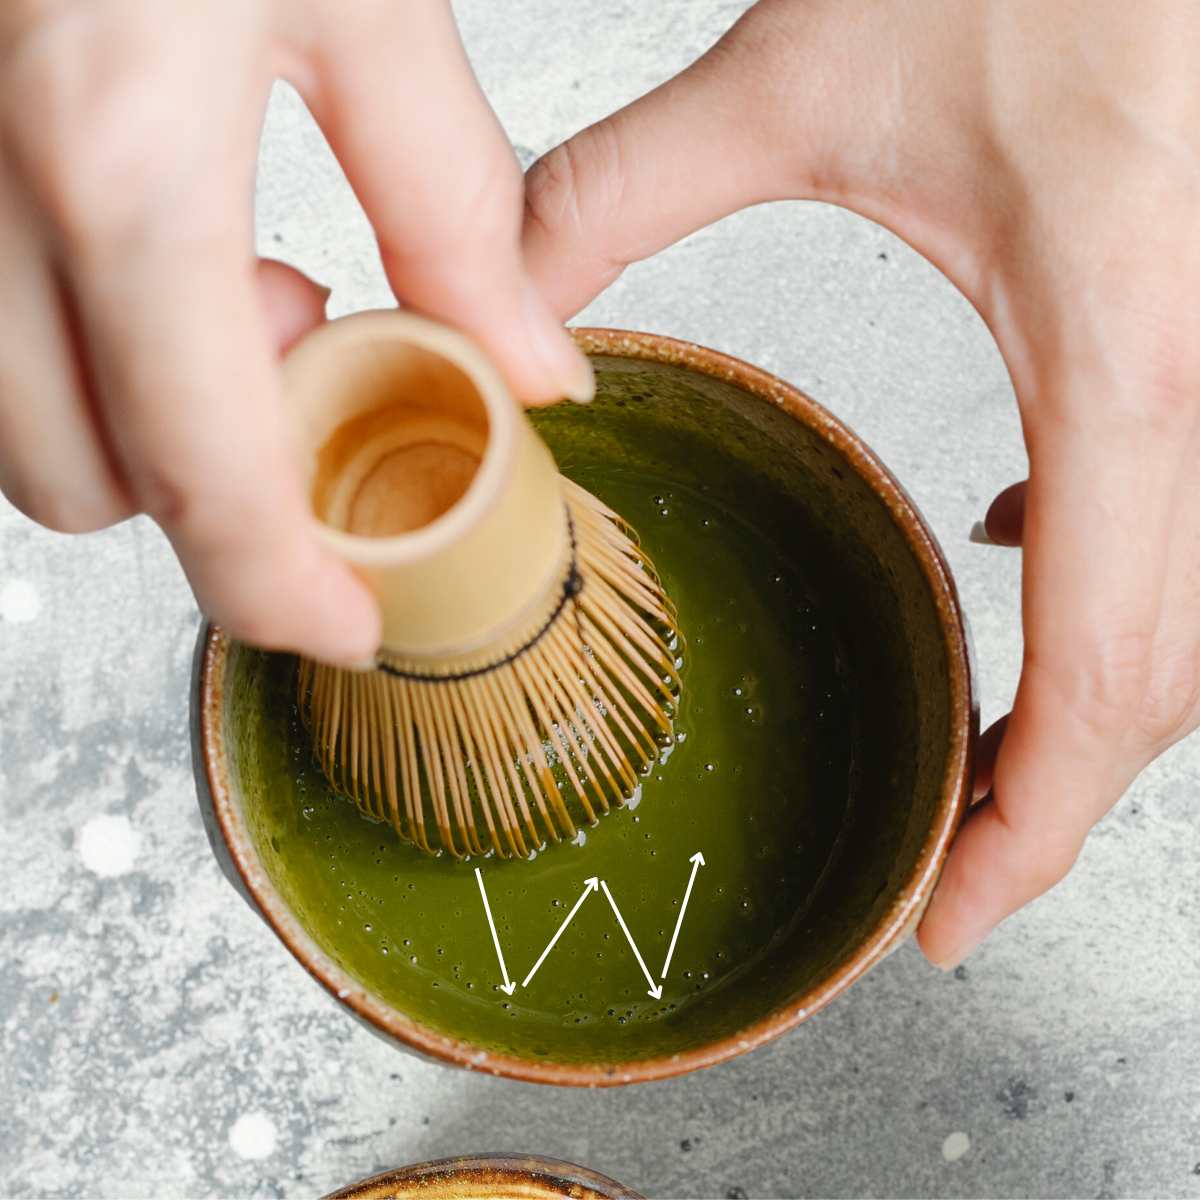 Matcha being mixed in a small bowl with arrows showing the "W" pattern for whisking.